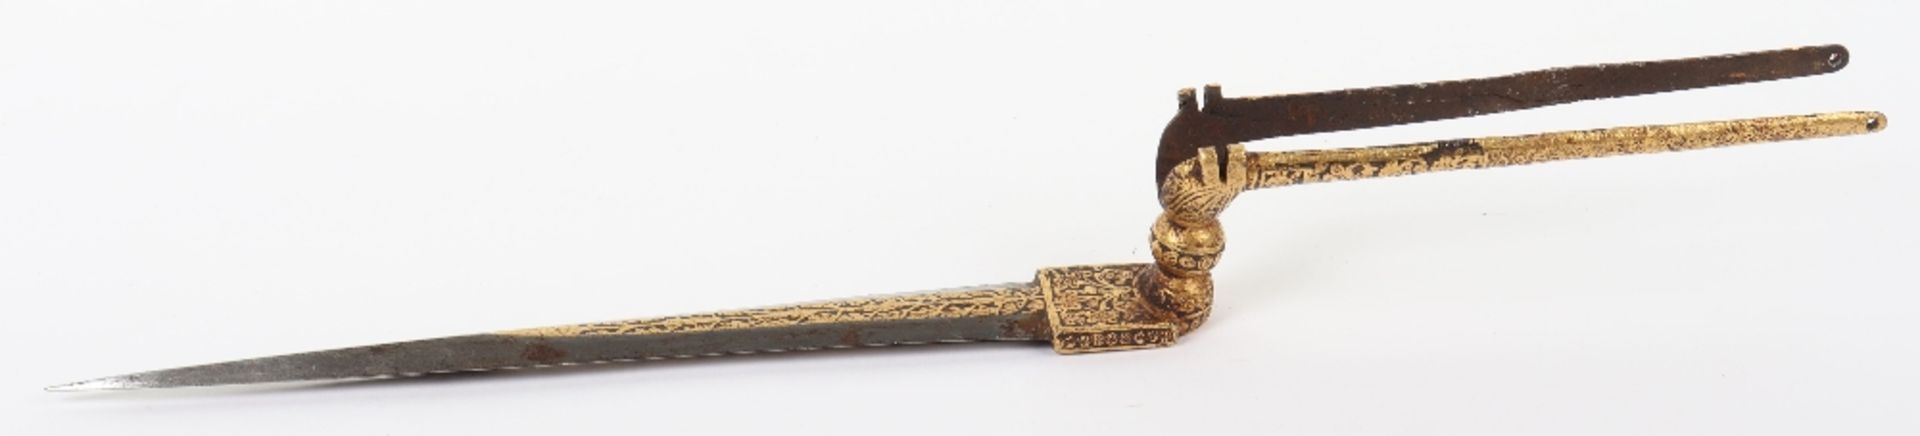 Rare Indian Bayonet Sangin Intended to be Bound to a Matchlock Gun Torador, 18th or 19th Century - Image 4 of 16